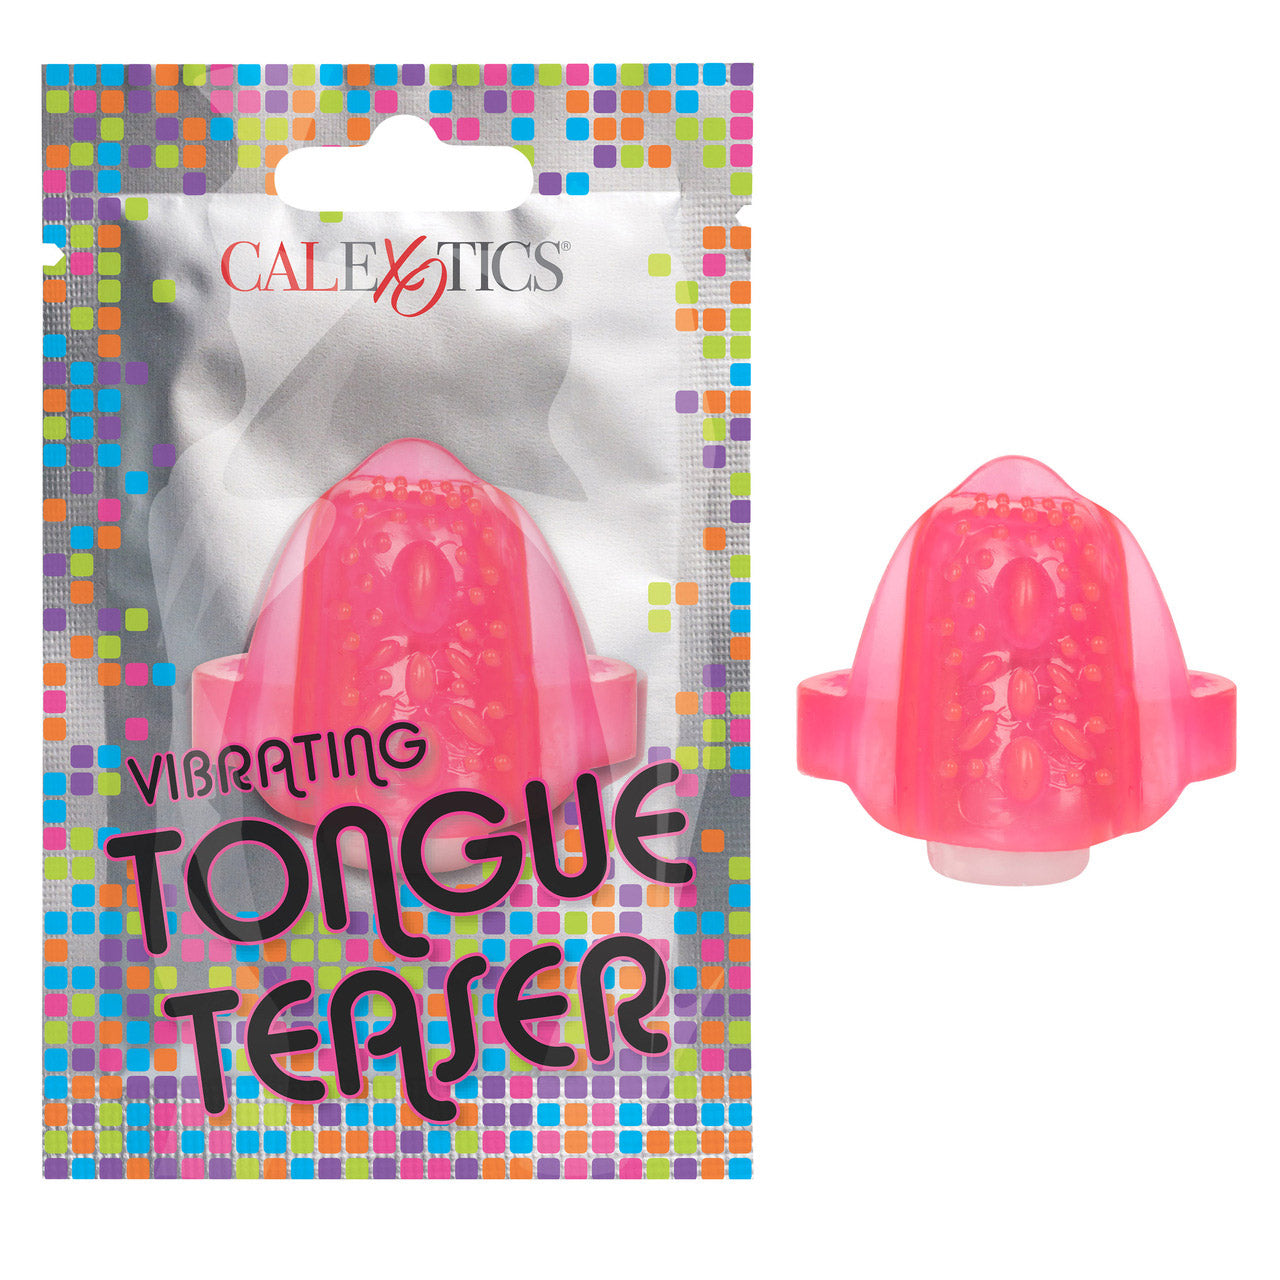 Foil Pack Vibrating Tongue Teaser - Pink - Thorn & Feather